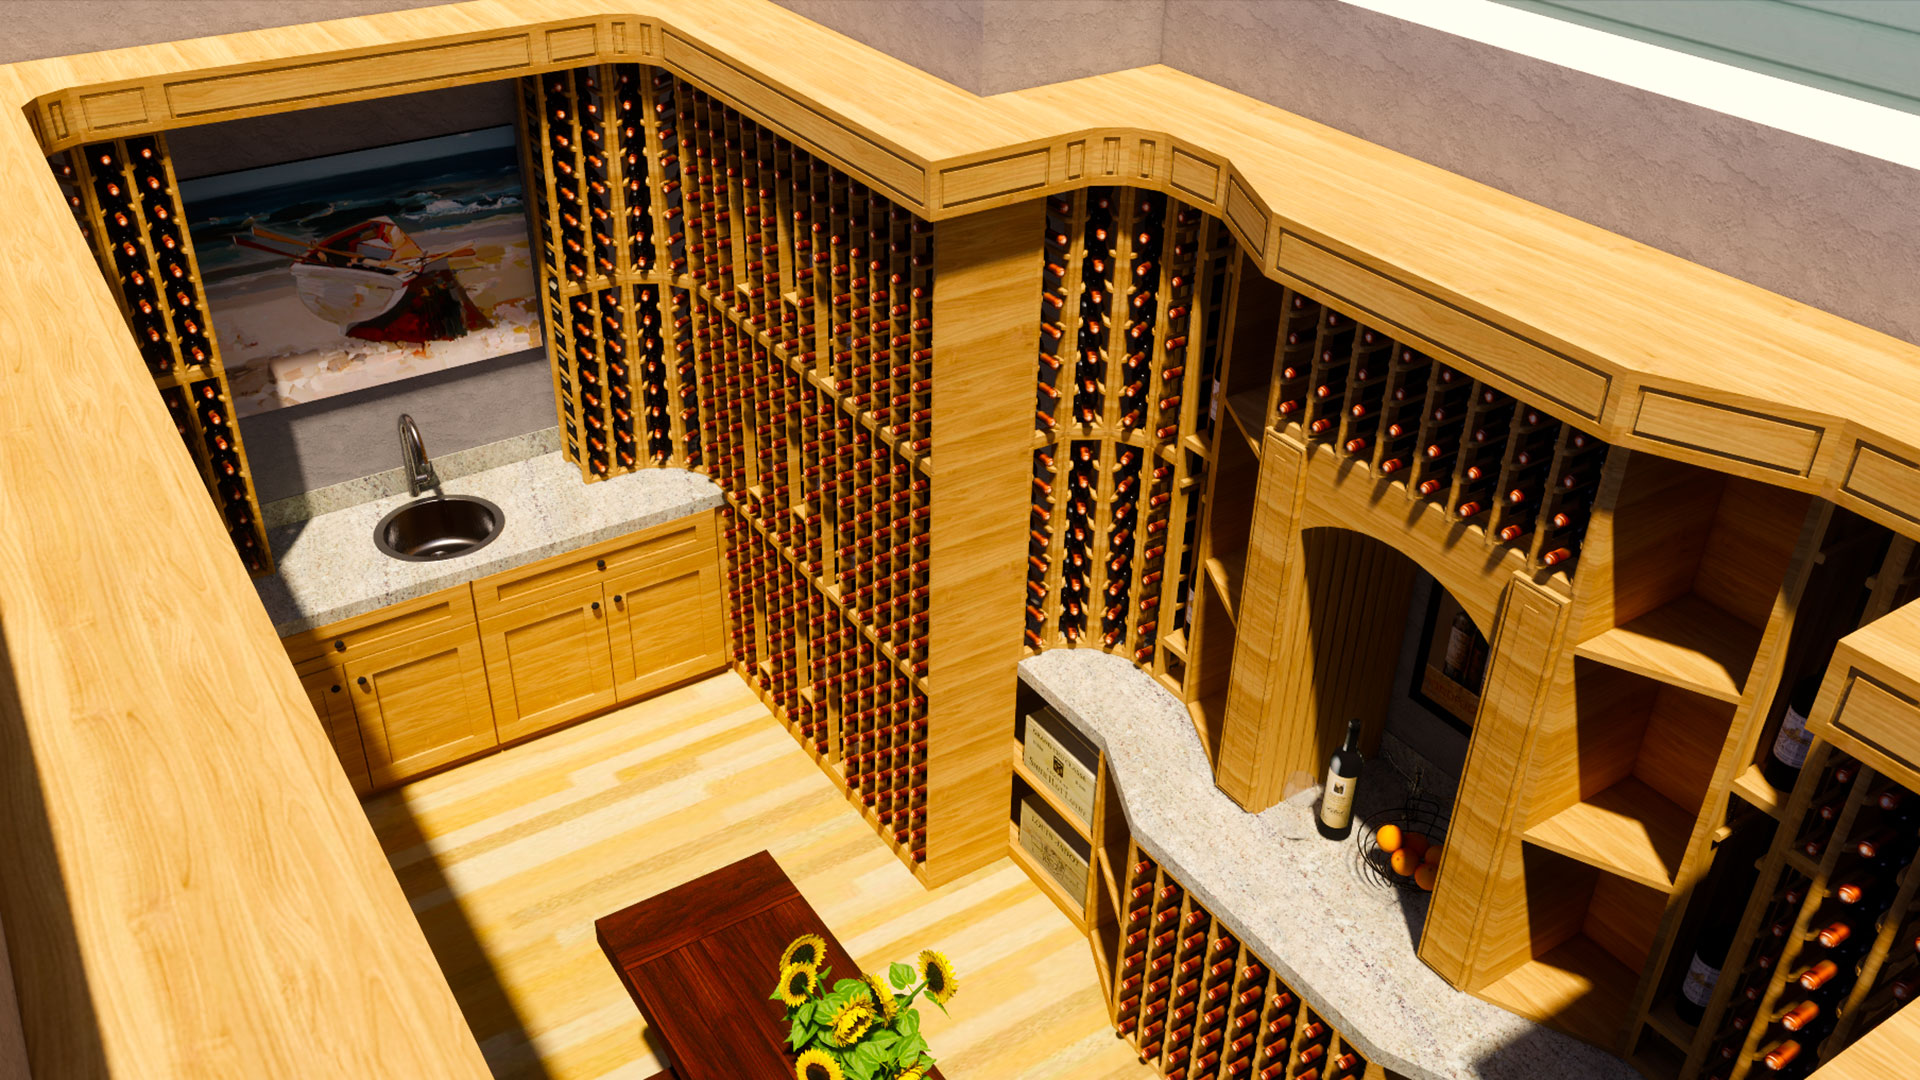 View of custom wine cellar, curved walls full of slots for wine storage. Granite countertops for serving and displaying